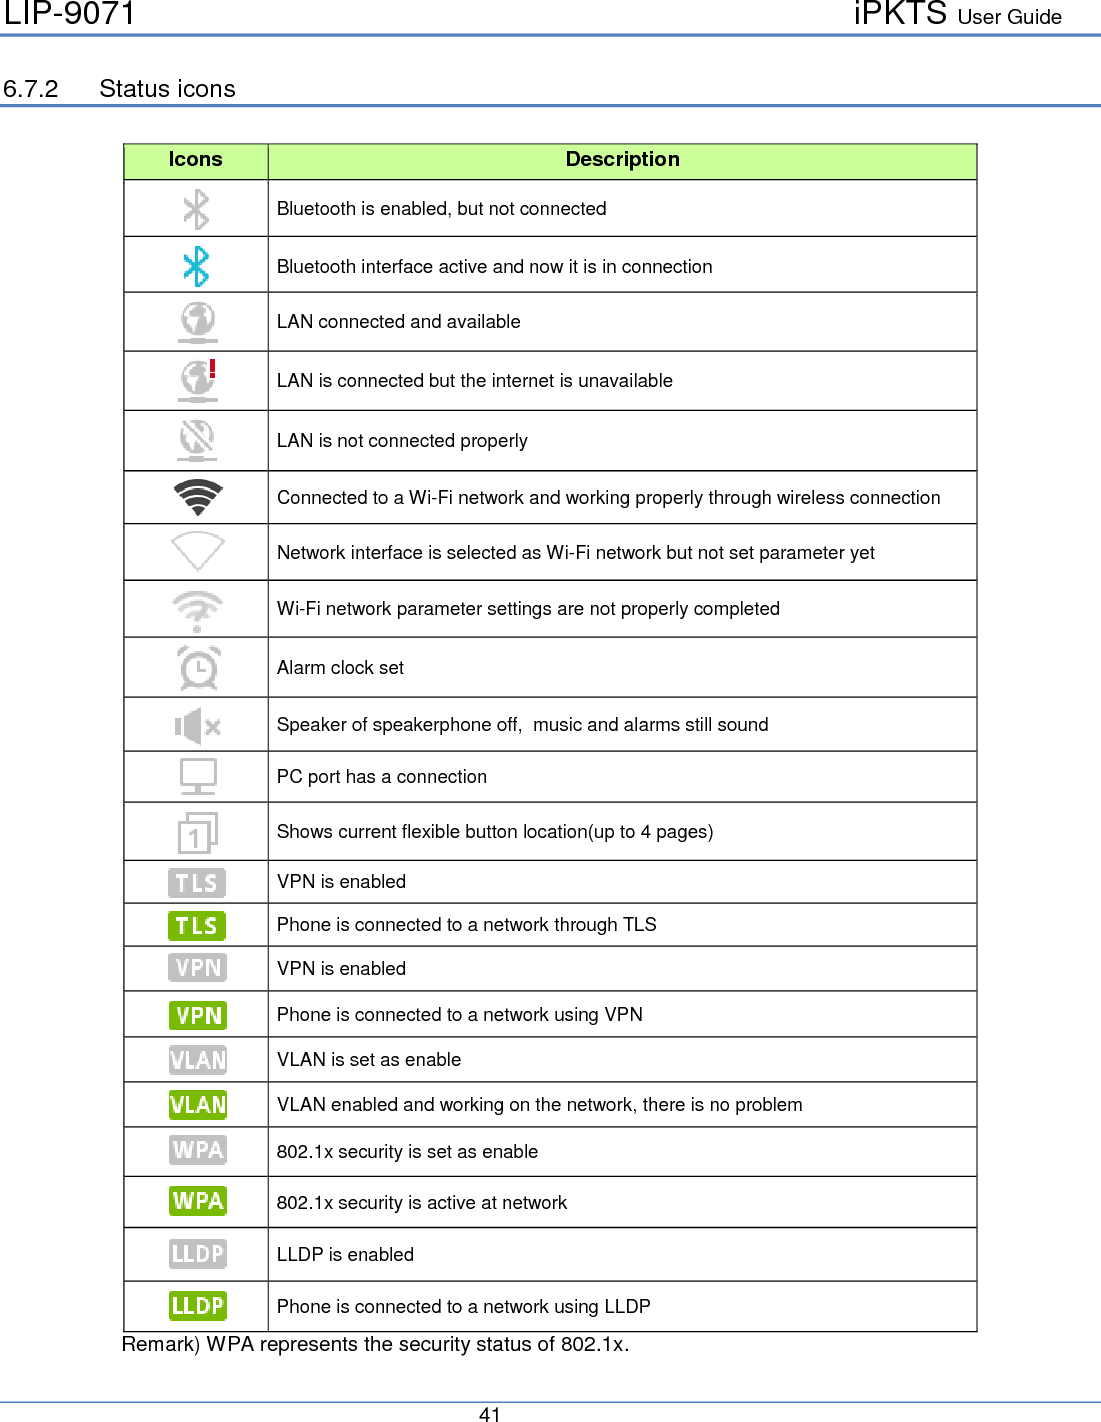 LIP-9071     iPKTS User Guide      41   6.7.2 Status icons  Icons Description  Bluetooth is enabled, but not connected  Bluetooth interface active and now it is in connection  LAN connected and available  LAN is connected but the internet is unavailable  LAN is not connected properly  Connected to a Wi-Fi network and working properly through wireless connection  Network interface is selected as Wi-Fi network but not set parameter yet  Wi-Fi network parameter settings are not properly completed  Alarm clock set  Speaker of speakerphone off,  music and alarms still sound  PC port has a connection  Shows current flexible button location(up to 4 pages)  VPN is enabled   Phone is connected to a network through TLS  VPN is enabled   Phone is connected to a network using VPN  VLAN is set as enable  VLAN enabled and working on the network, there is no problem  802.1x security is set as enable  802.1x security is active at network  LLDP is enabled  Phone is connected to a network using LLDP Remark) WPA represents the security status of 802.1x.  